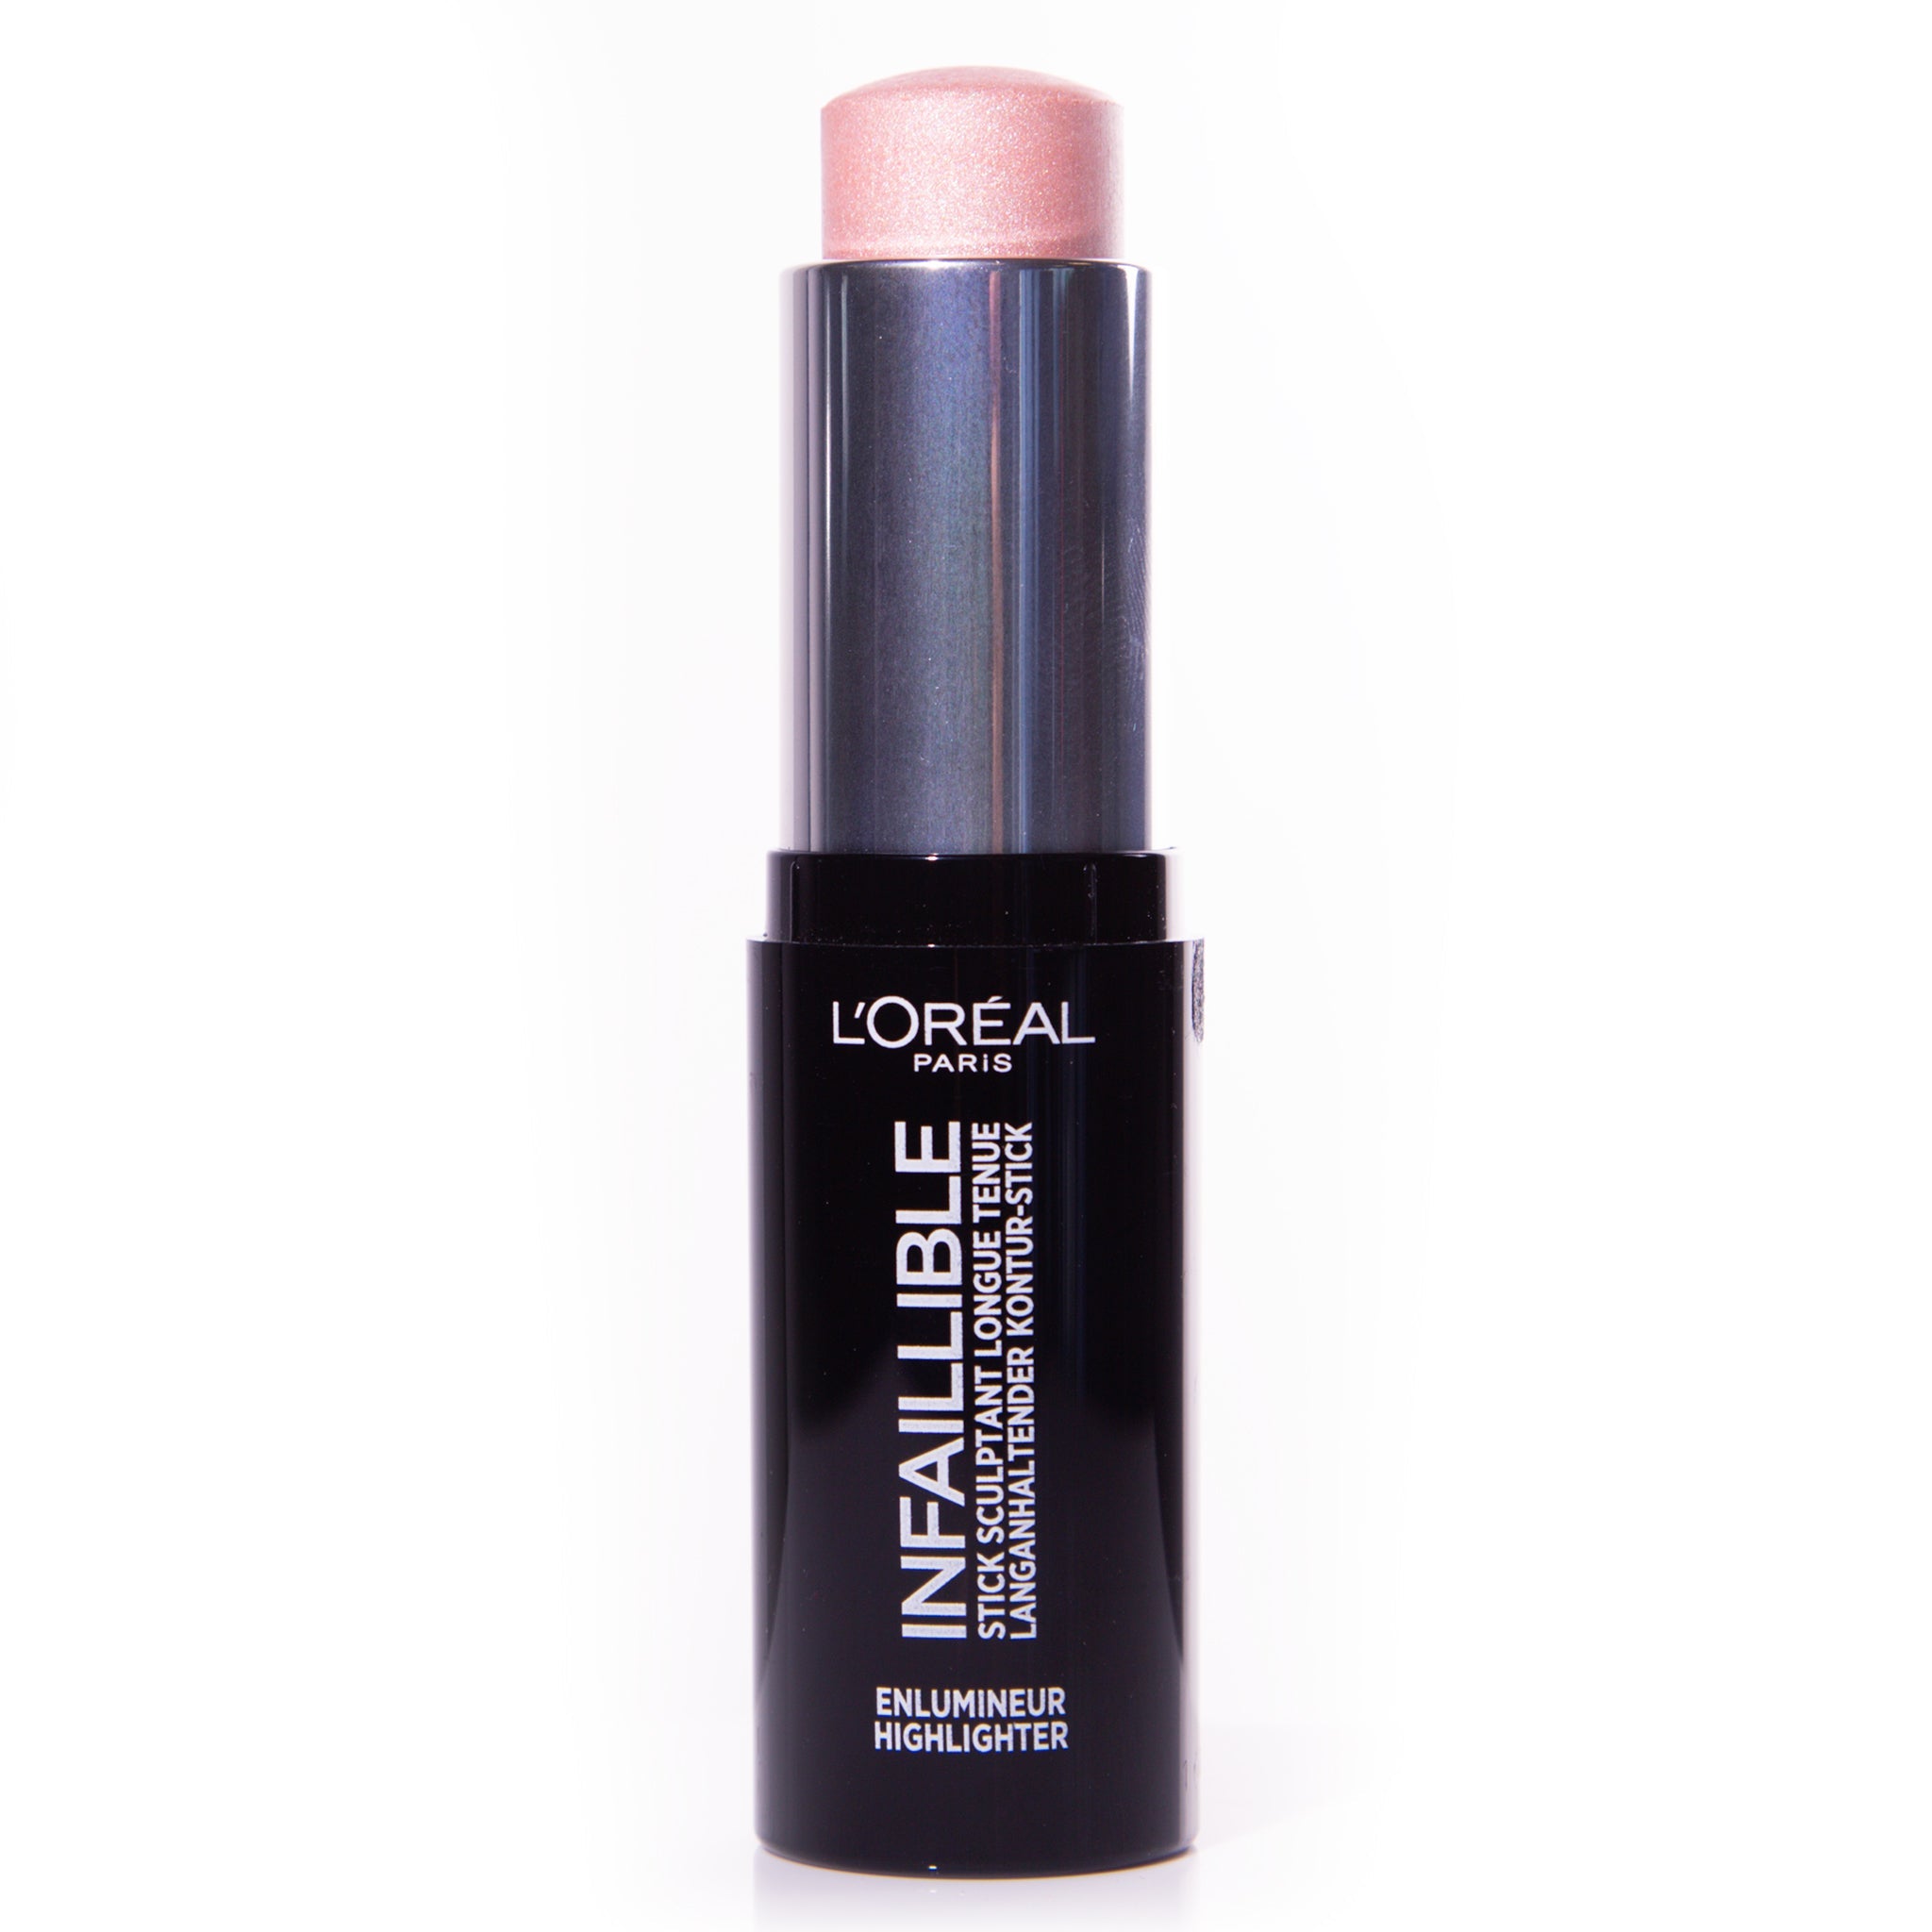 L'Oreal Infaillible Longwear Shaping Stick Highlighter - 503 Slay in Rose